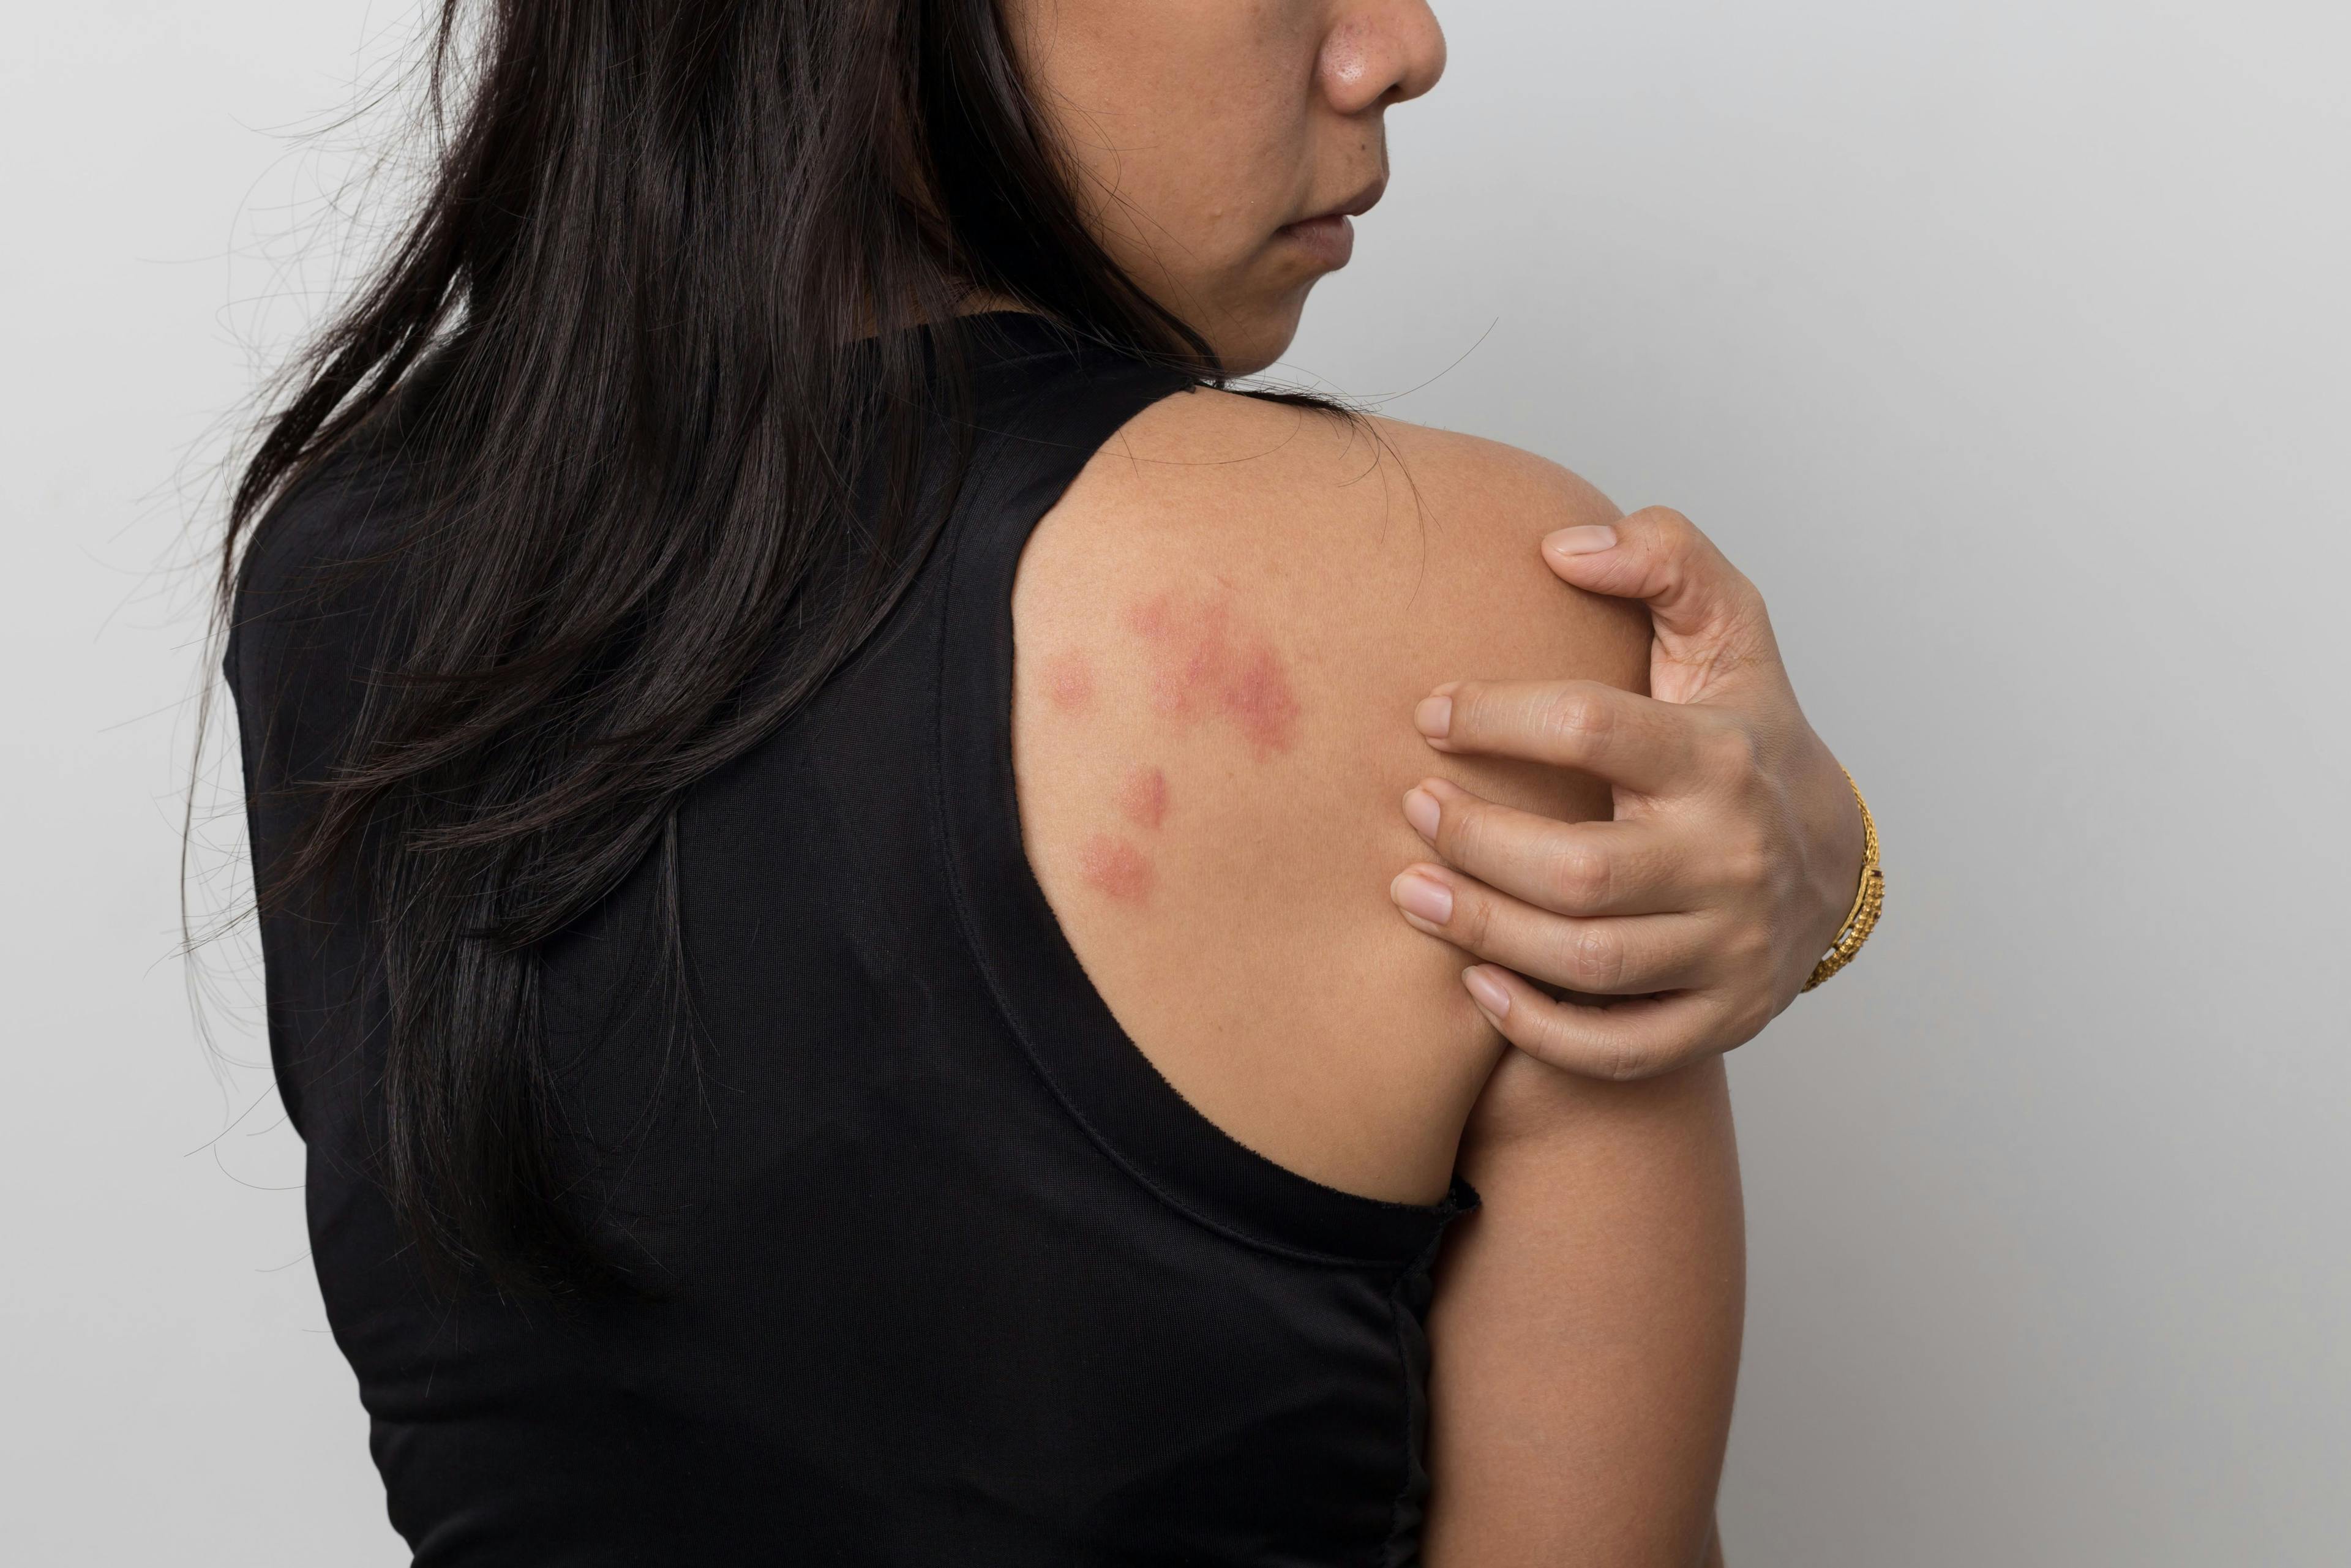 Woman with urticaria on the back of her shoulder.